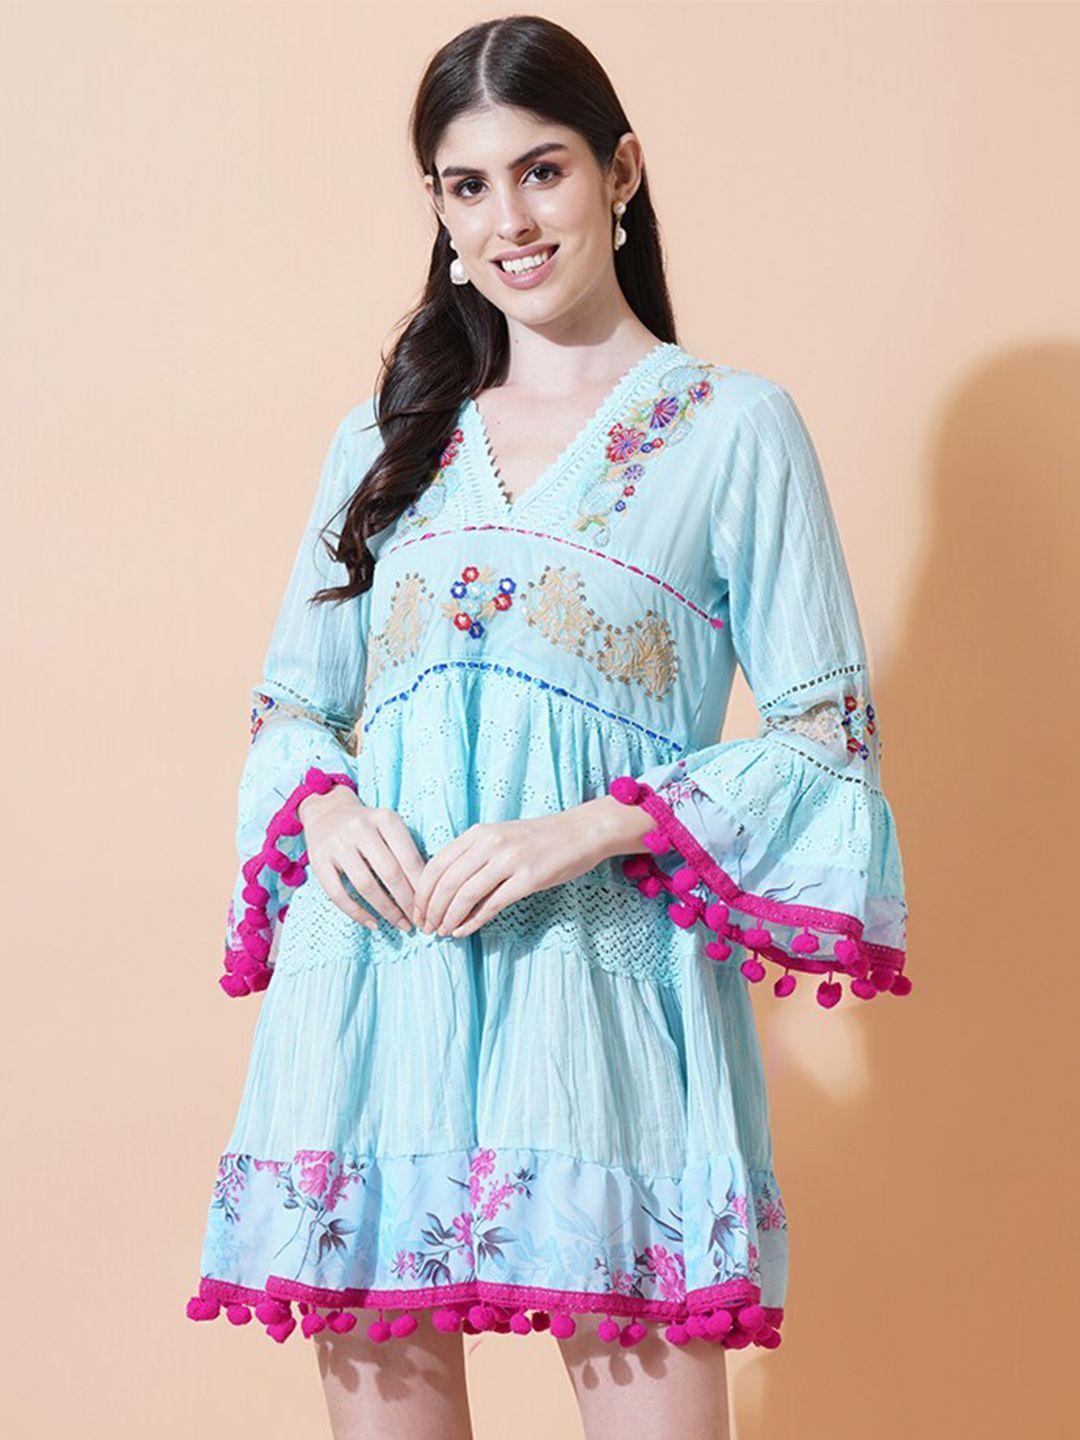 ix impression turquoise blue floral bell sleeve with pom-pom detail fit & flare dress